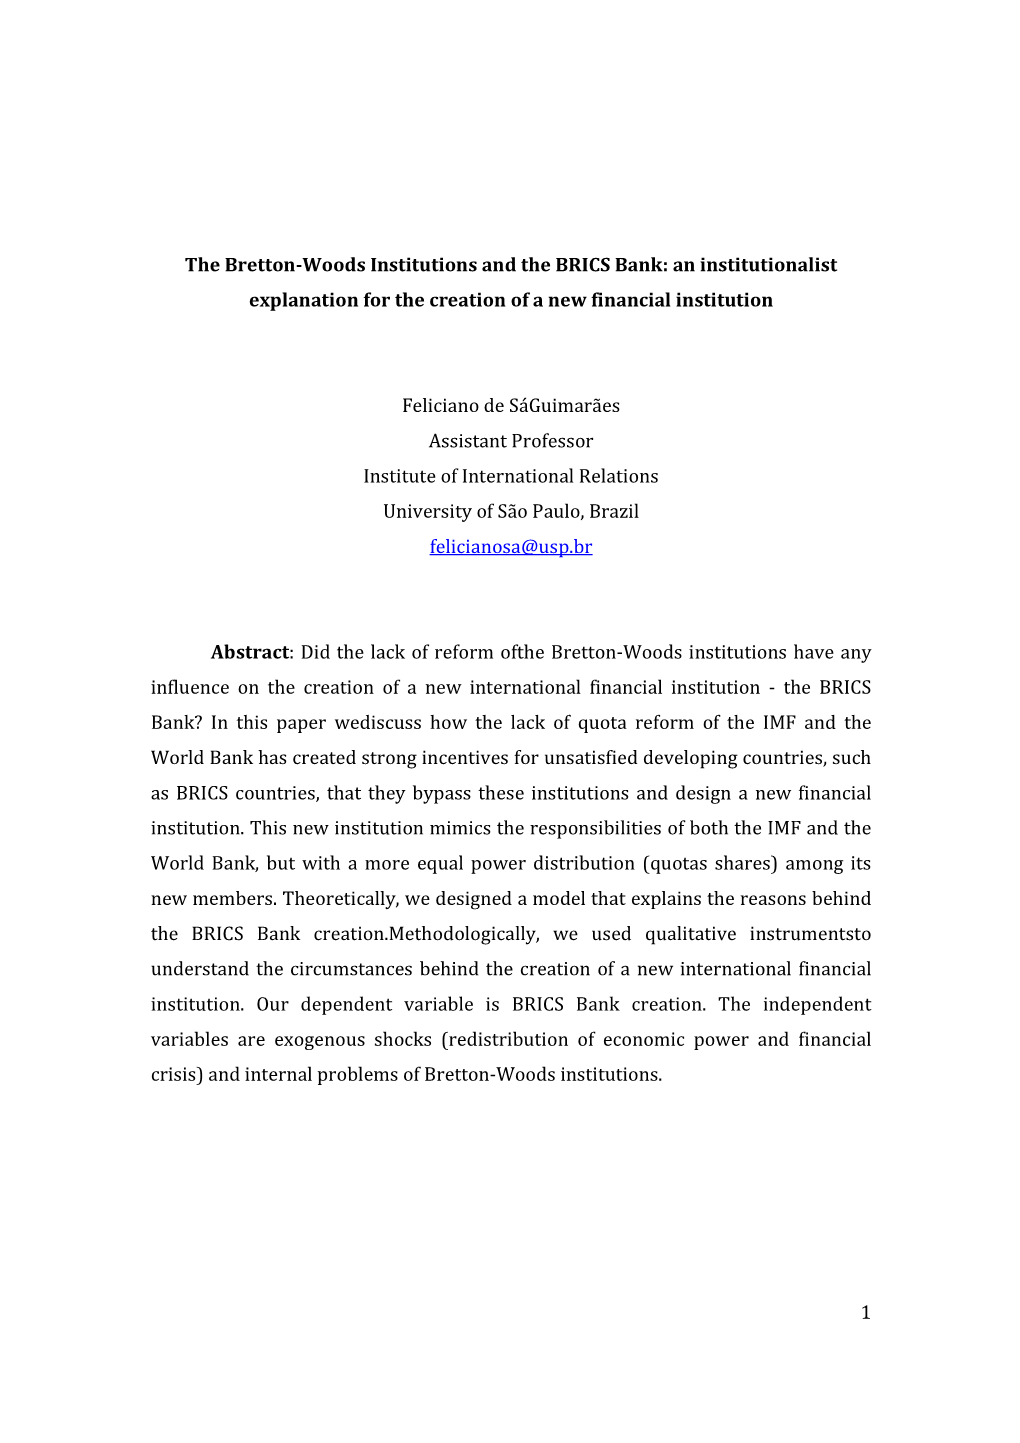 1 the Bretton-Woods Institutions and the BRICS Bank: an Institutionalist